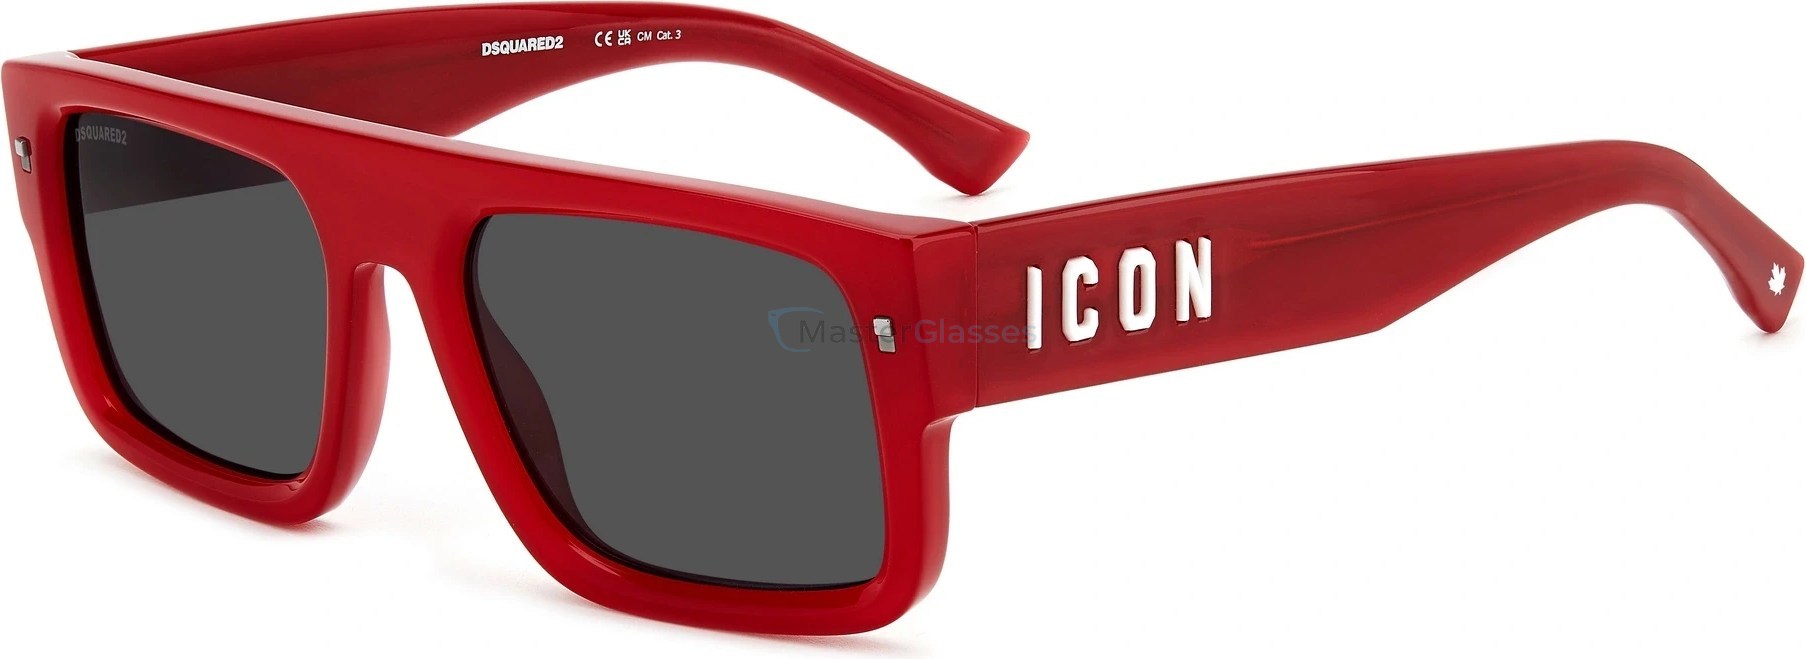   DSQUARED2 ICON 0008/S C9A Red